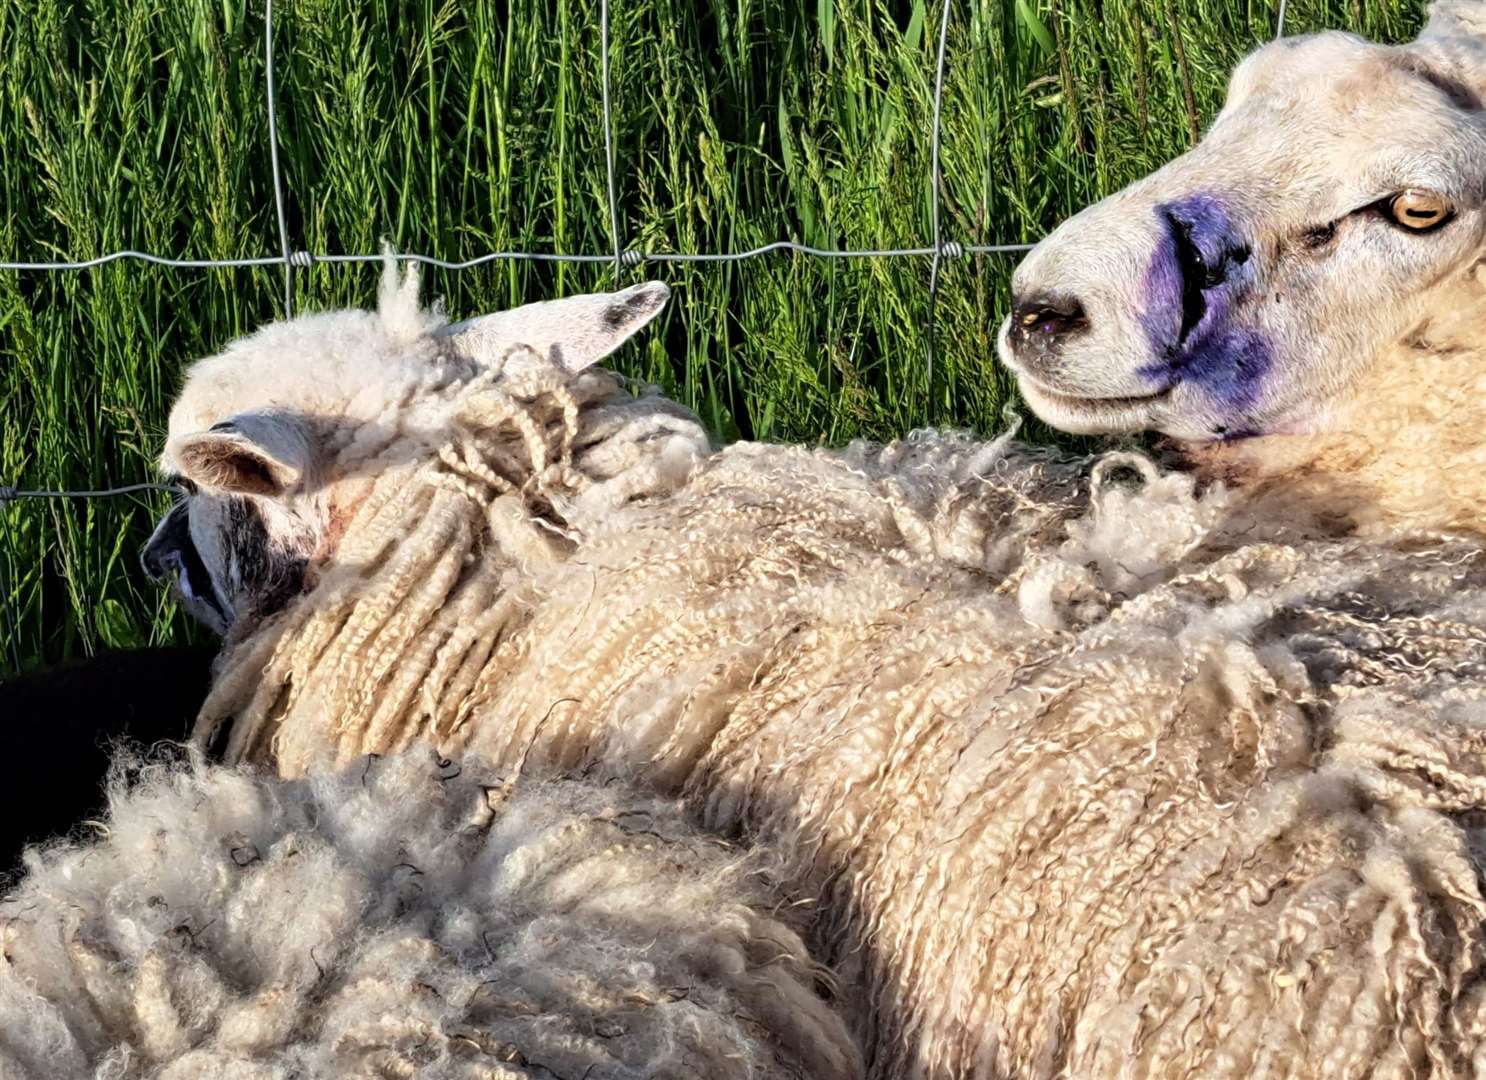 The sheep suffered facial injuries in the suspected dog attack. Picture: Donna Walker-Hudson